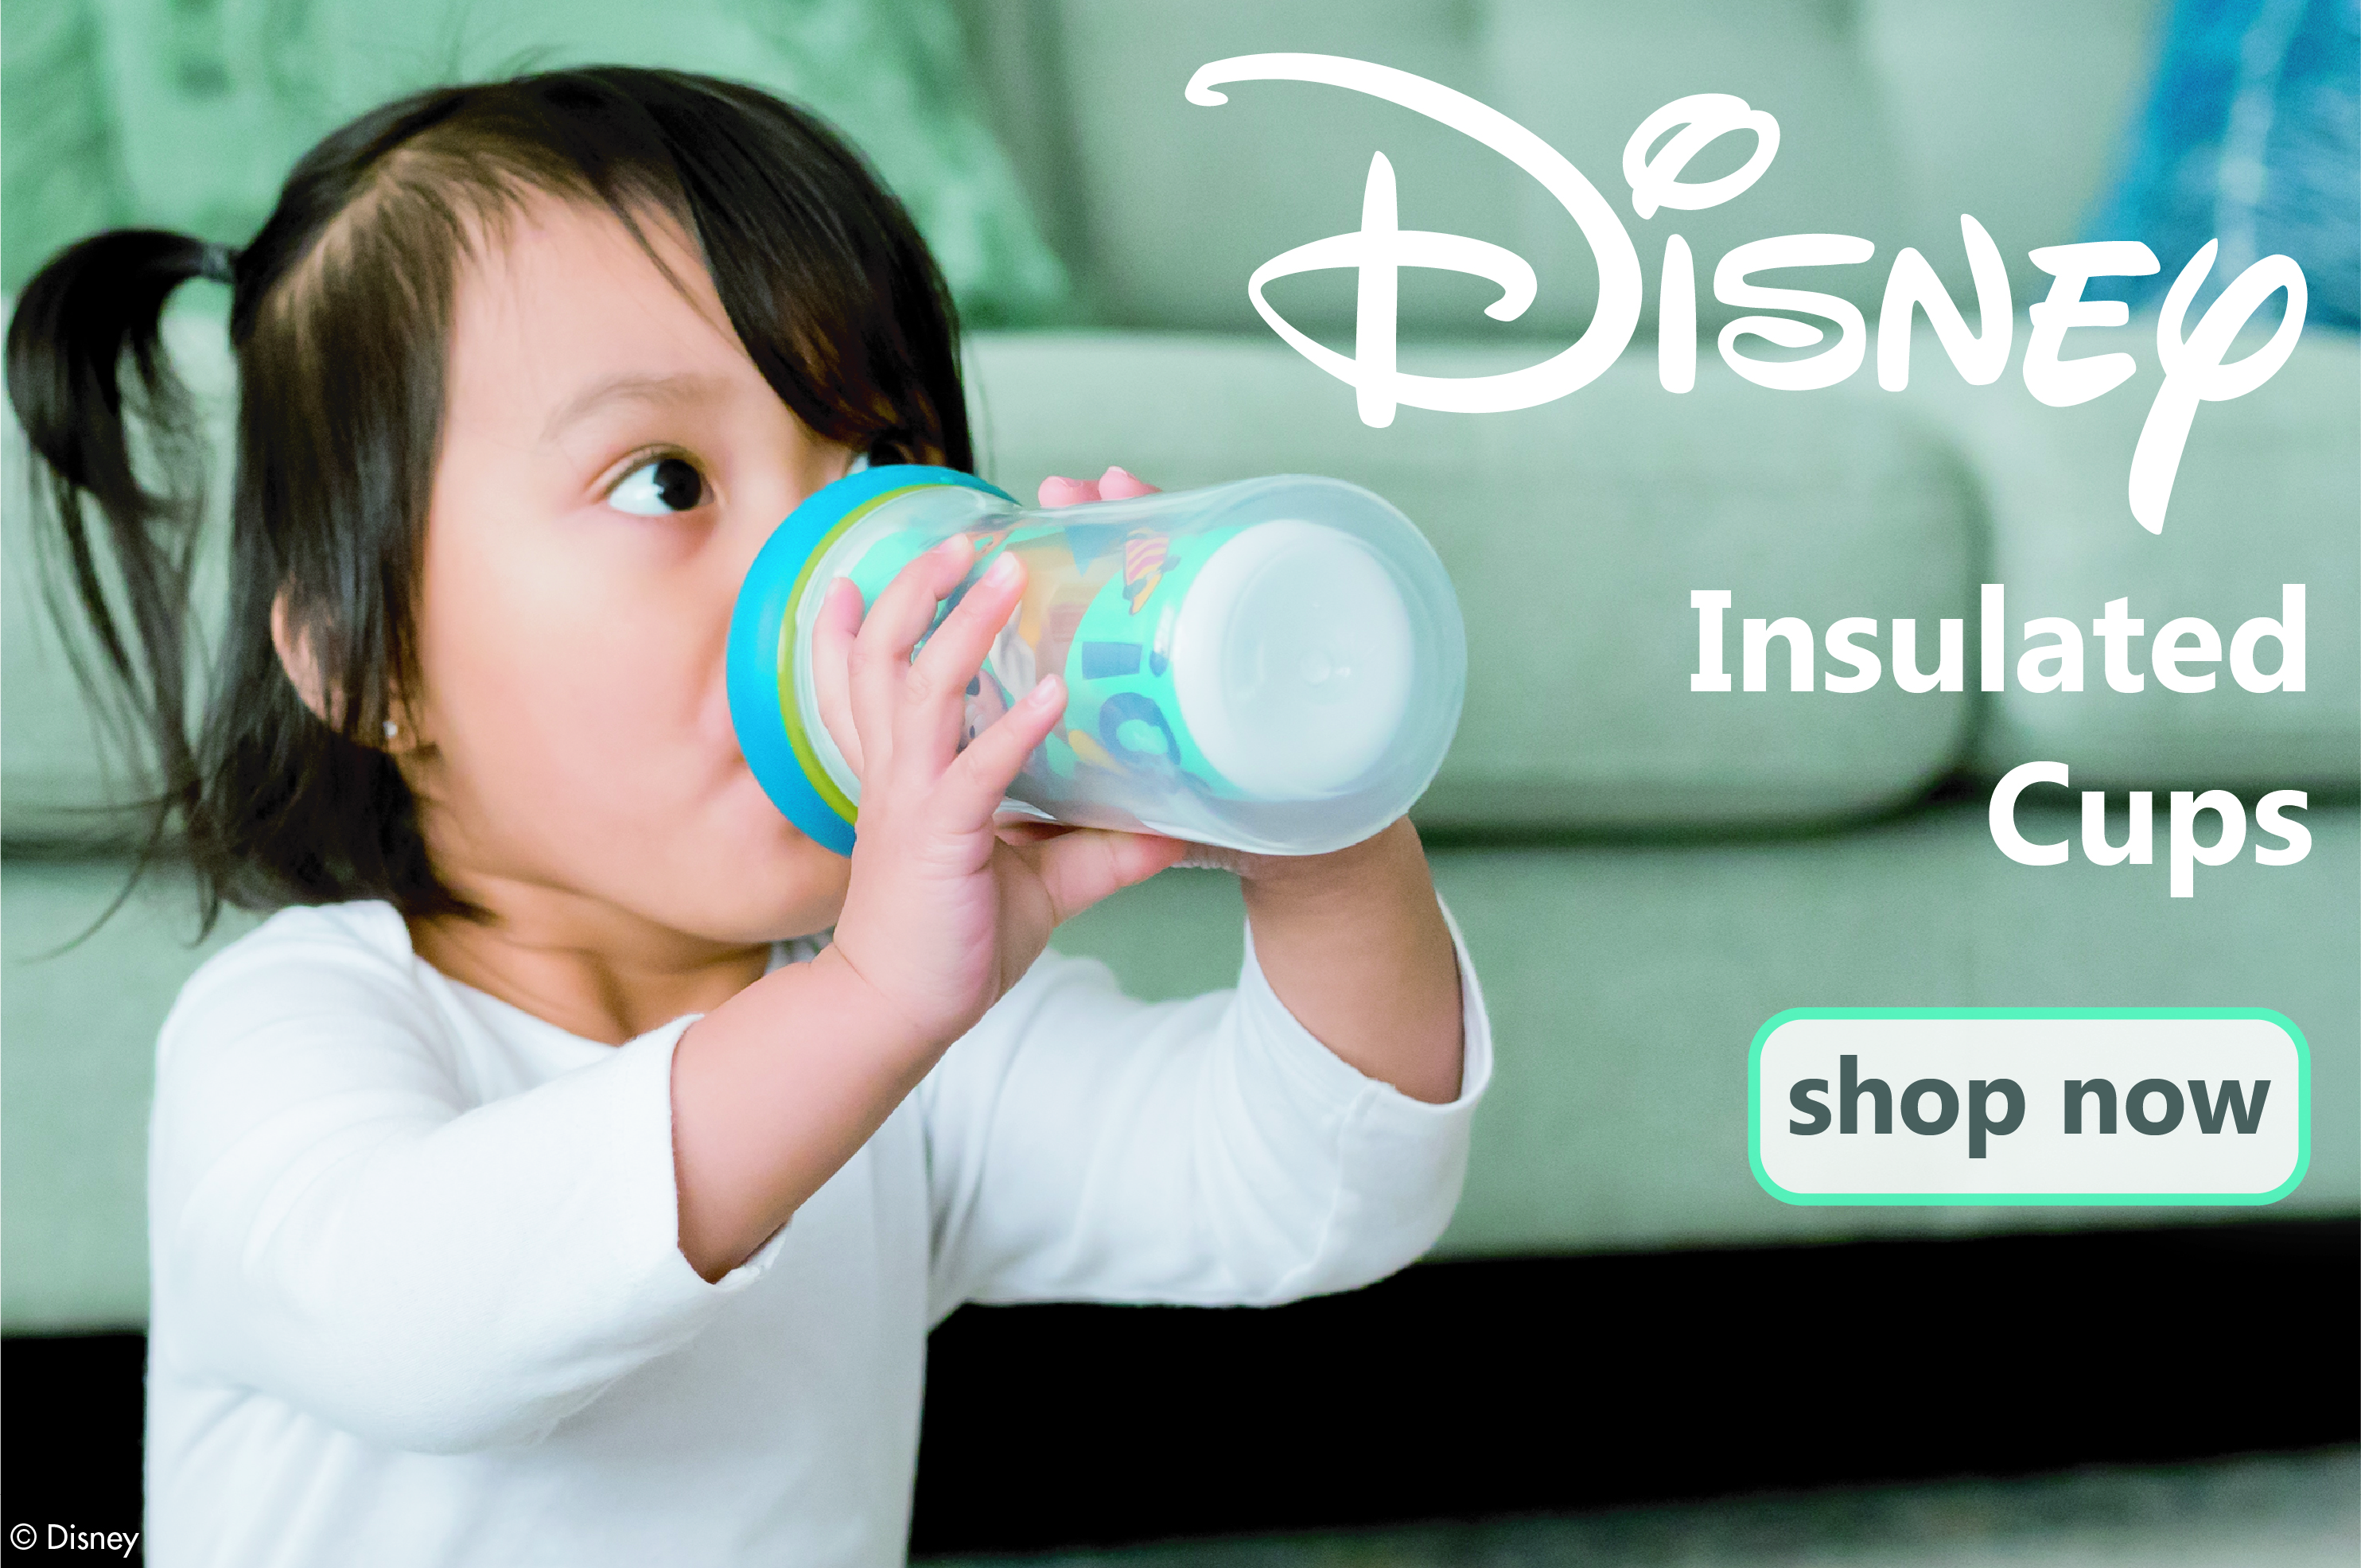 Disney Insulated Cups. Shop Now